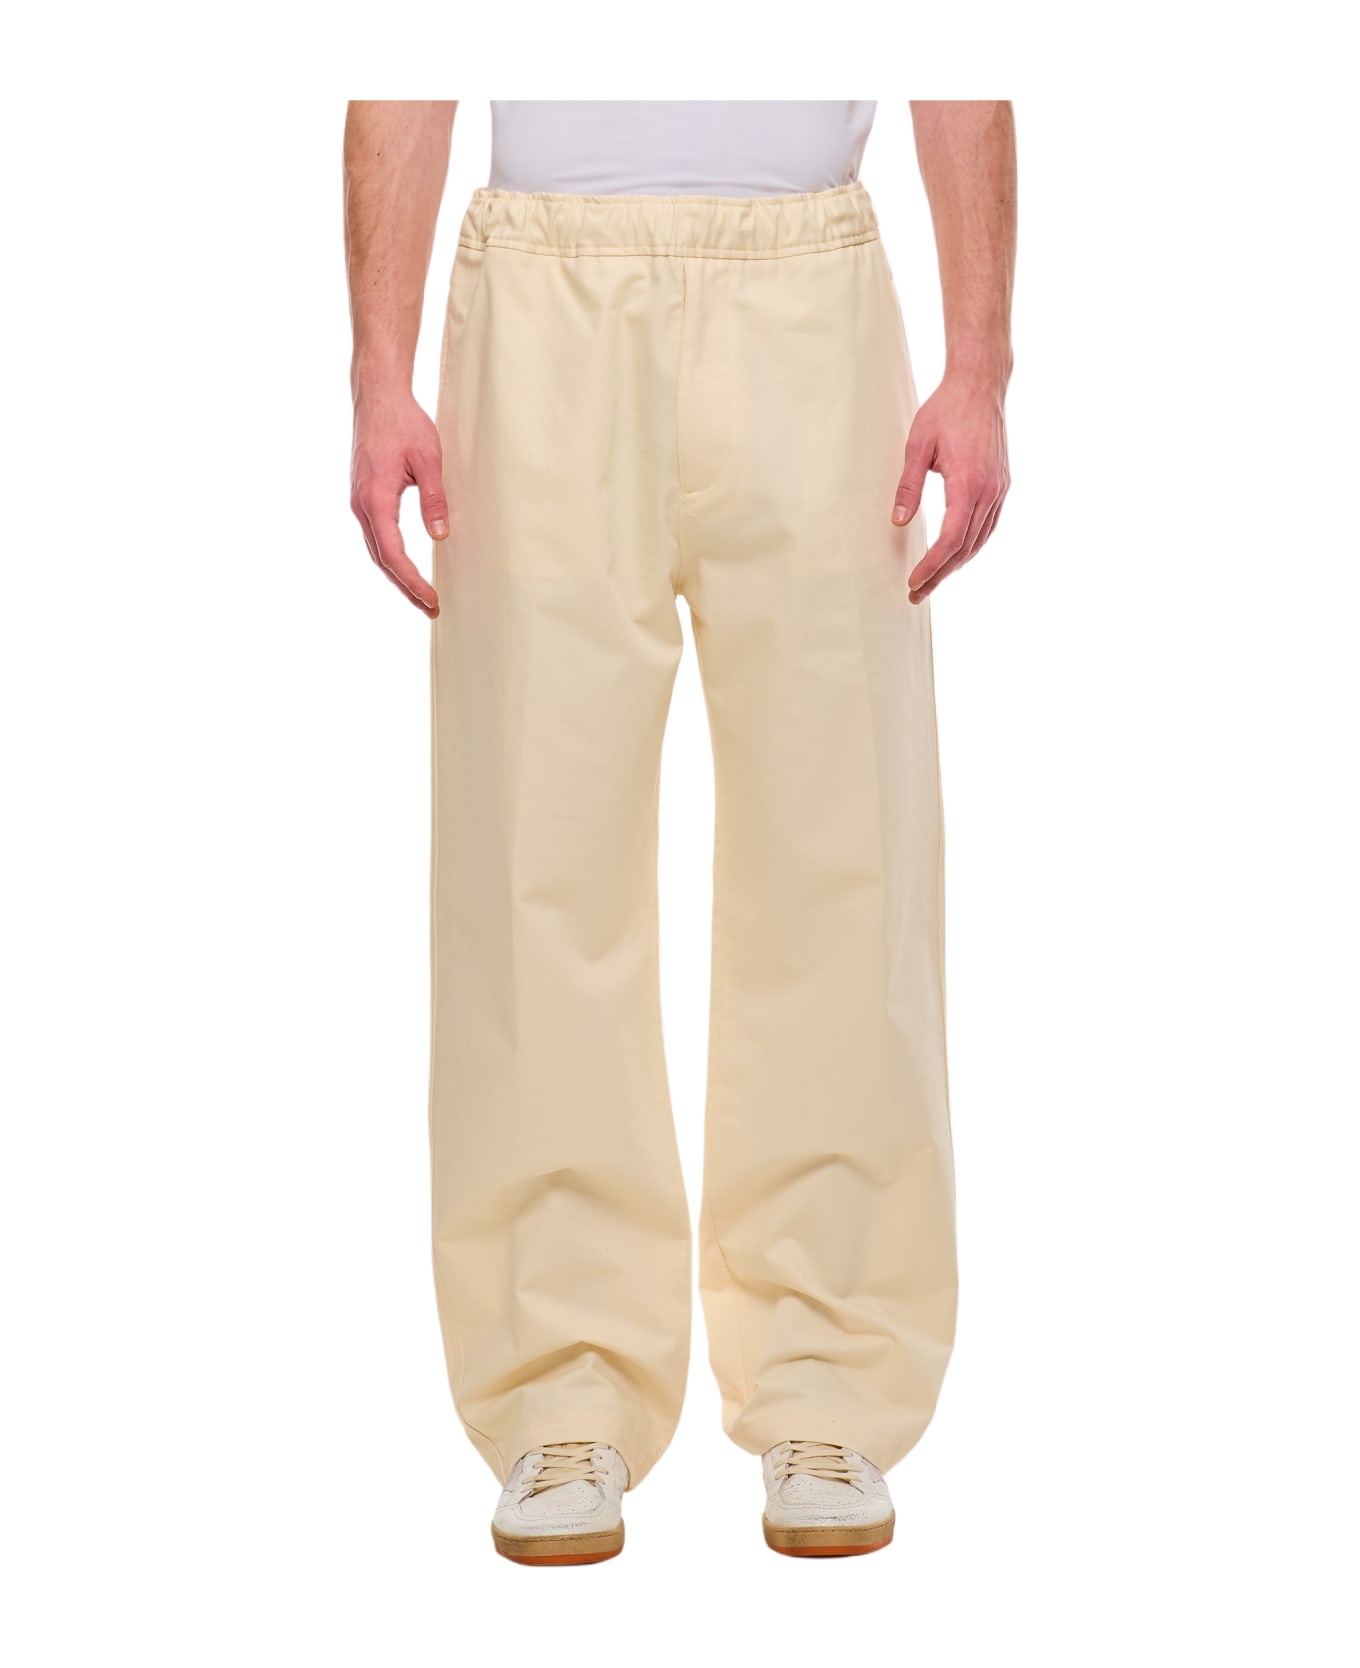 Moncler Cotton Trousers - White ボトムス